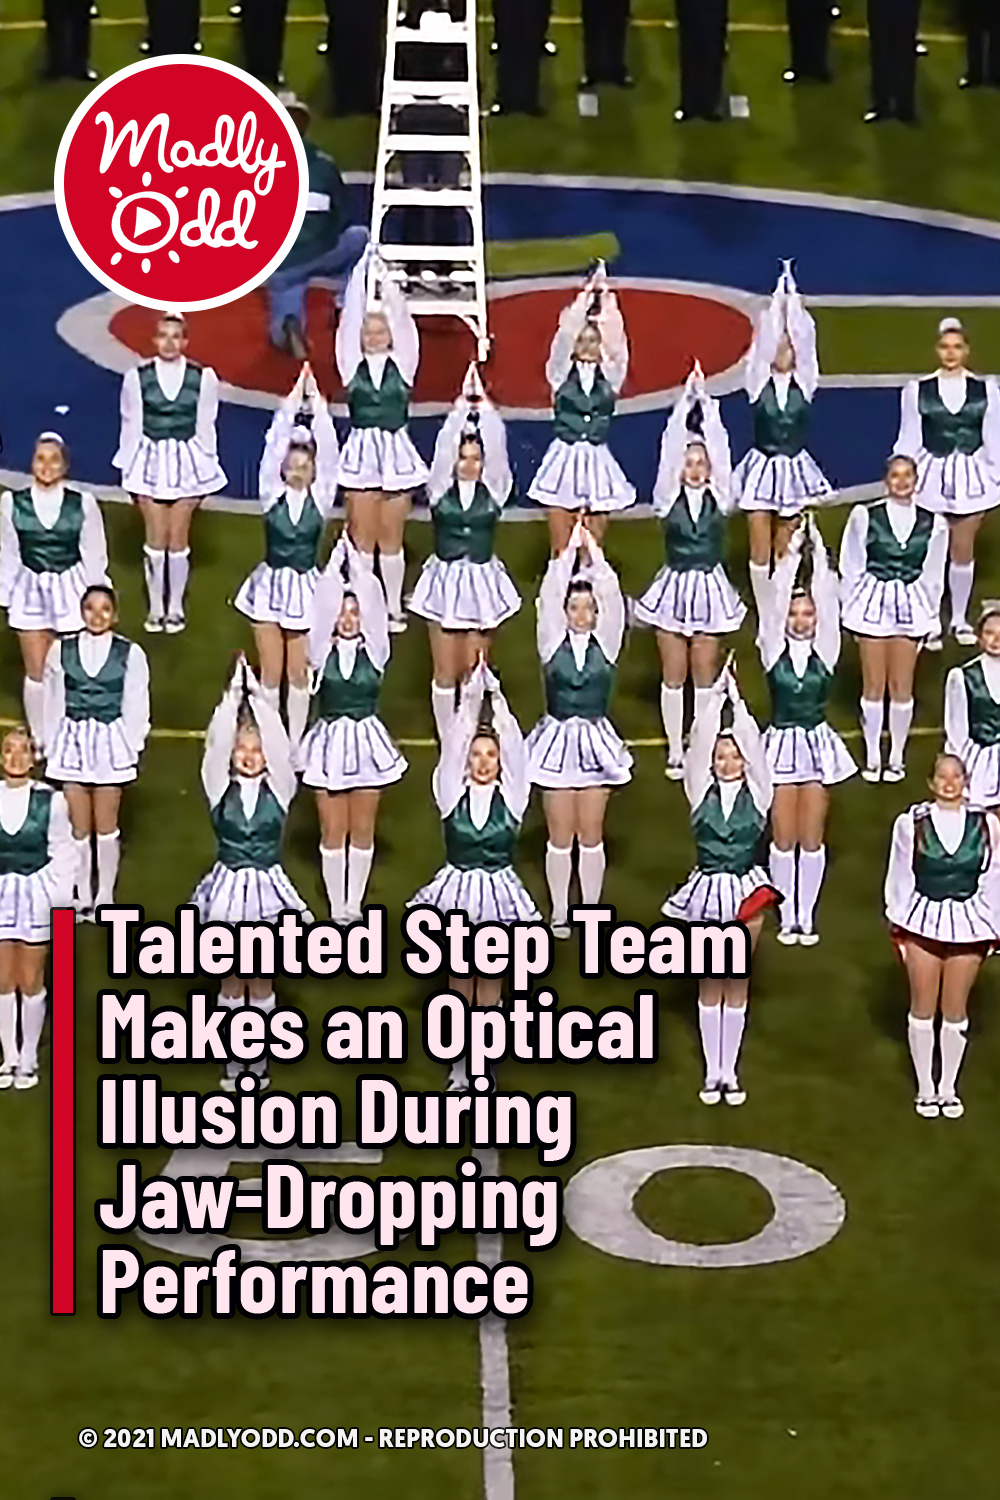 Talented Step Team Makes an Optical Illusion During Jaw-Dropping Performance